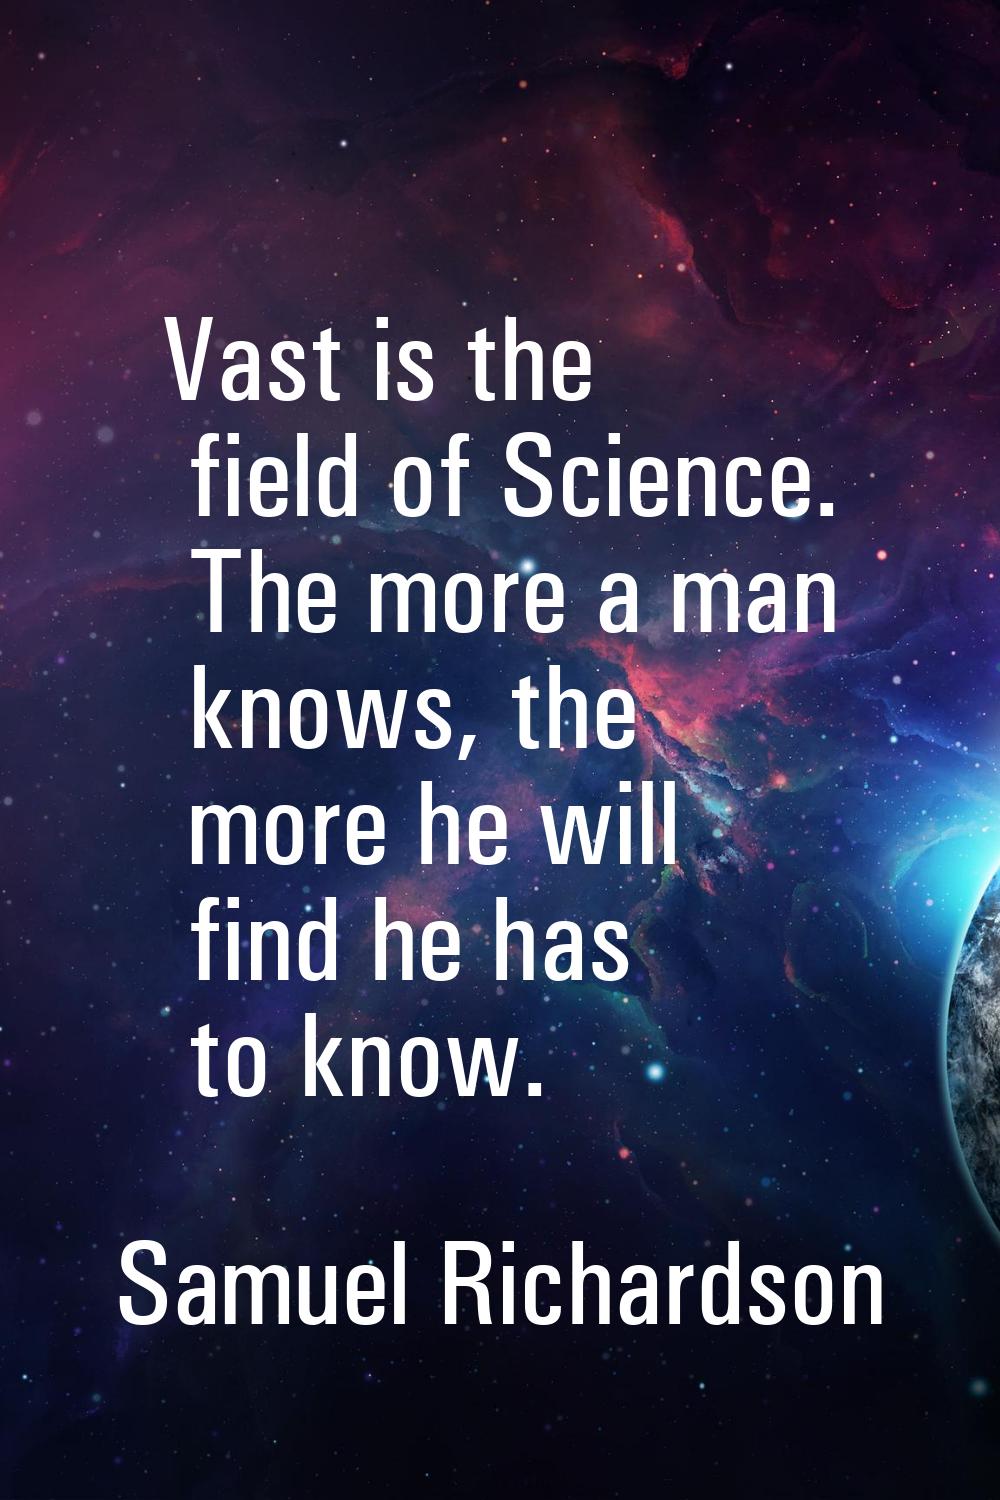 Vast is the field of Science. The more a man knows, the more he will find he has to know.